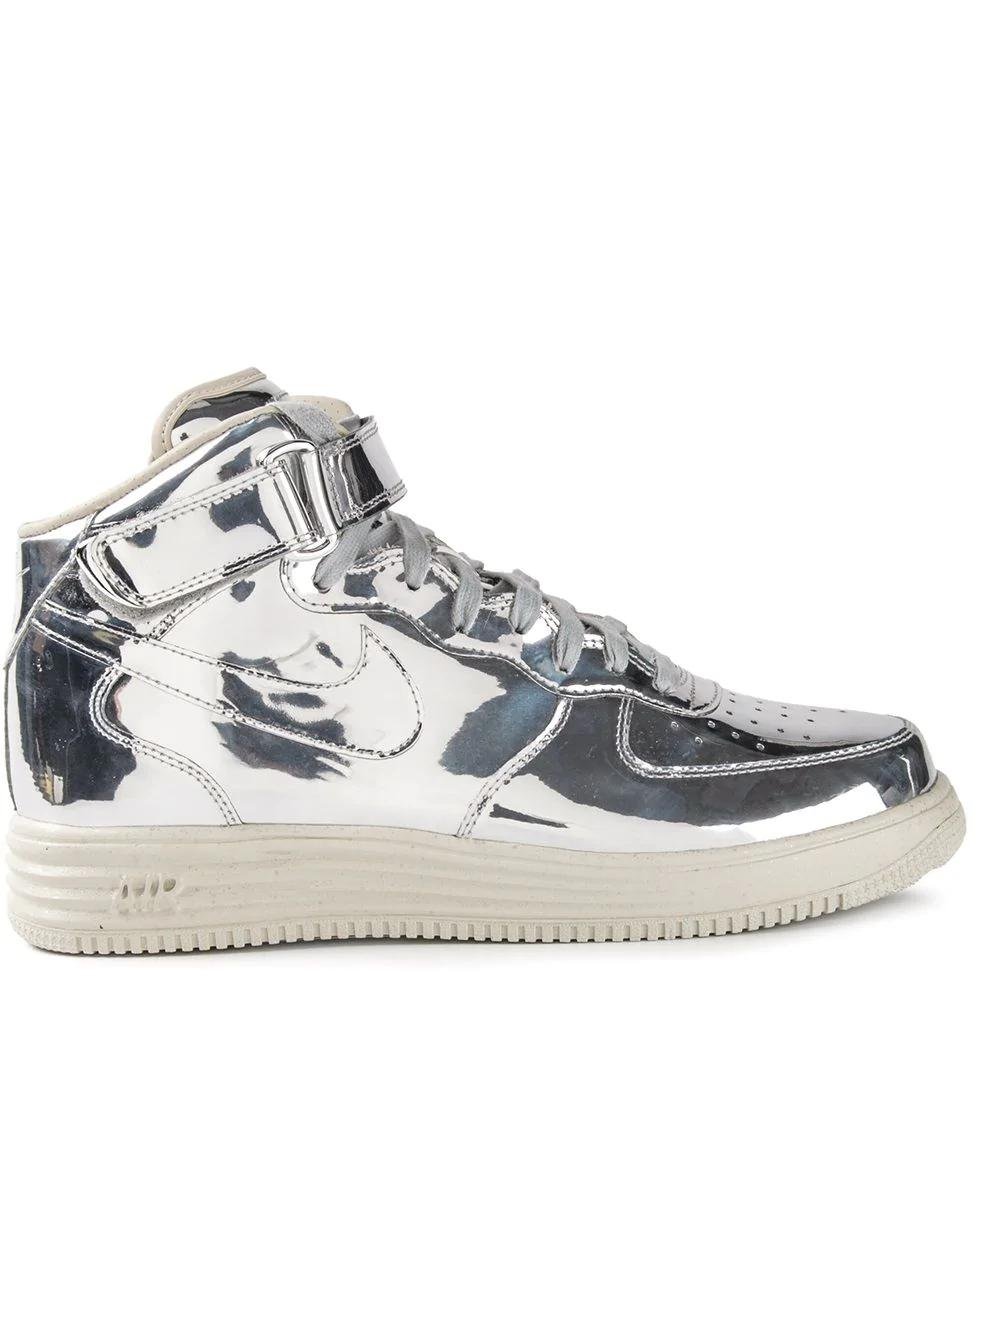 Lunar Force 1 Mid SP "Liquid Silver" sneakers by NIKE